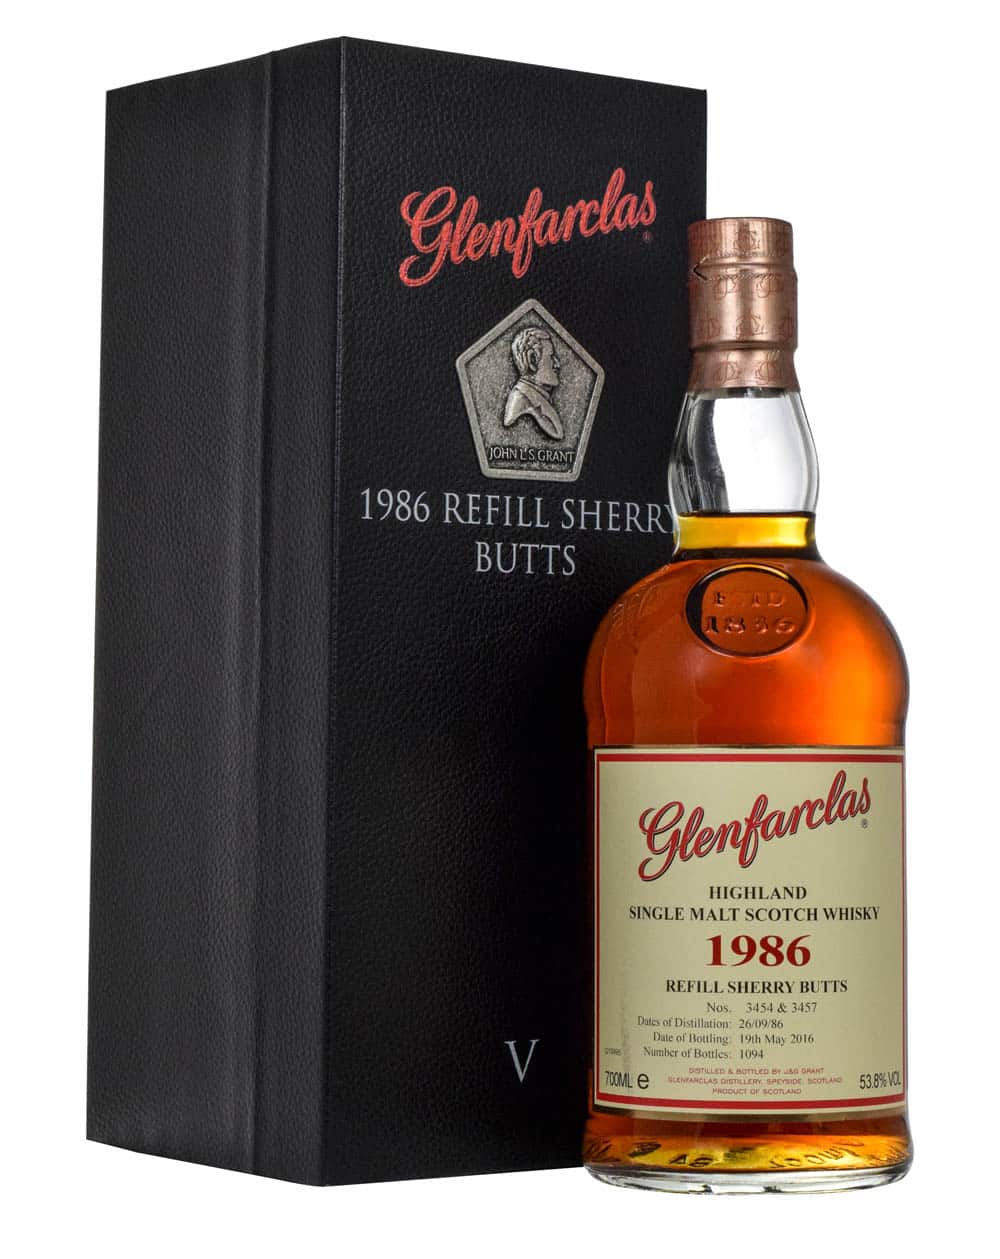 Glenfarclas 29 Years Old1986 Refill Sherry Butts Box Must Have Malts MHM